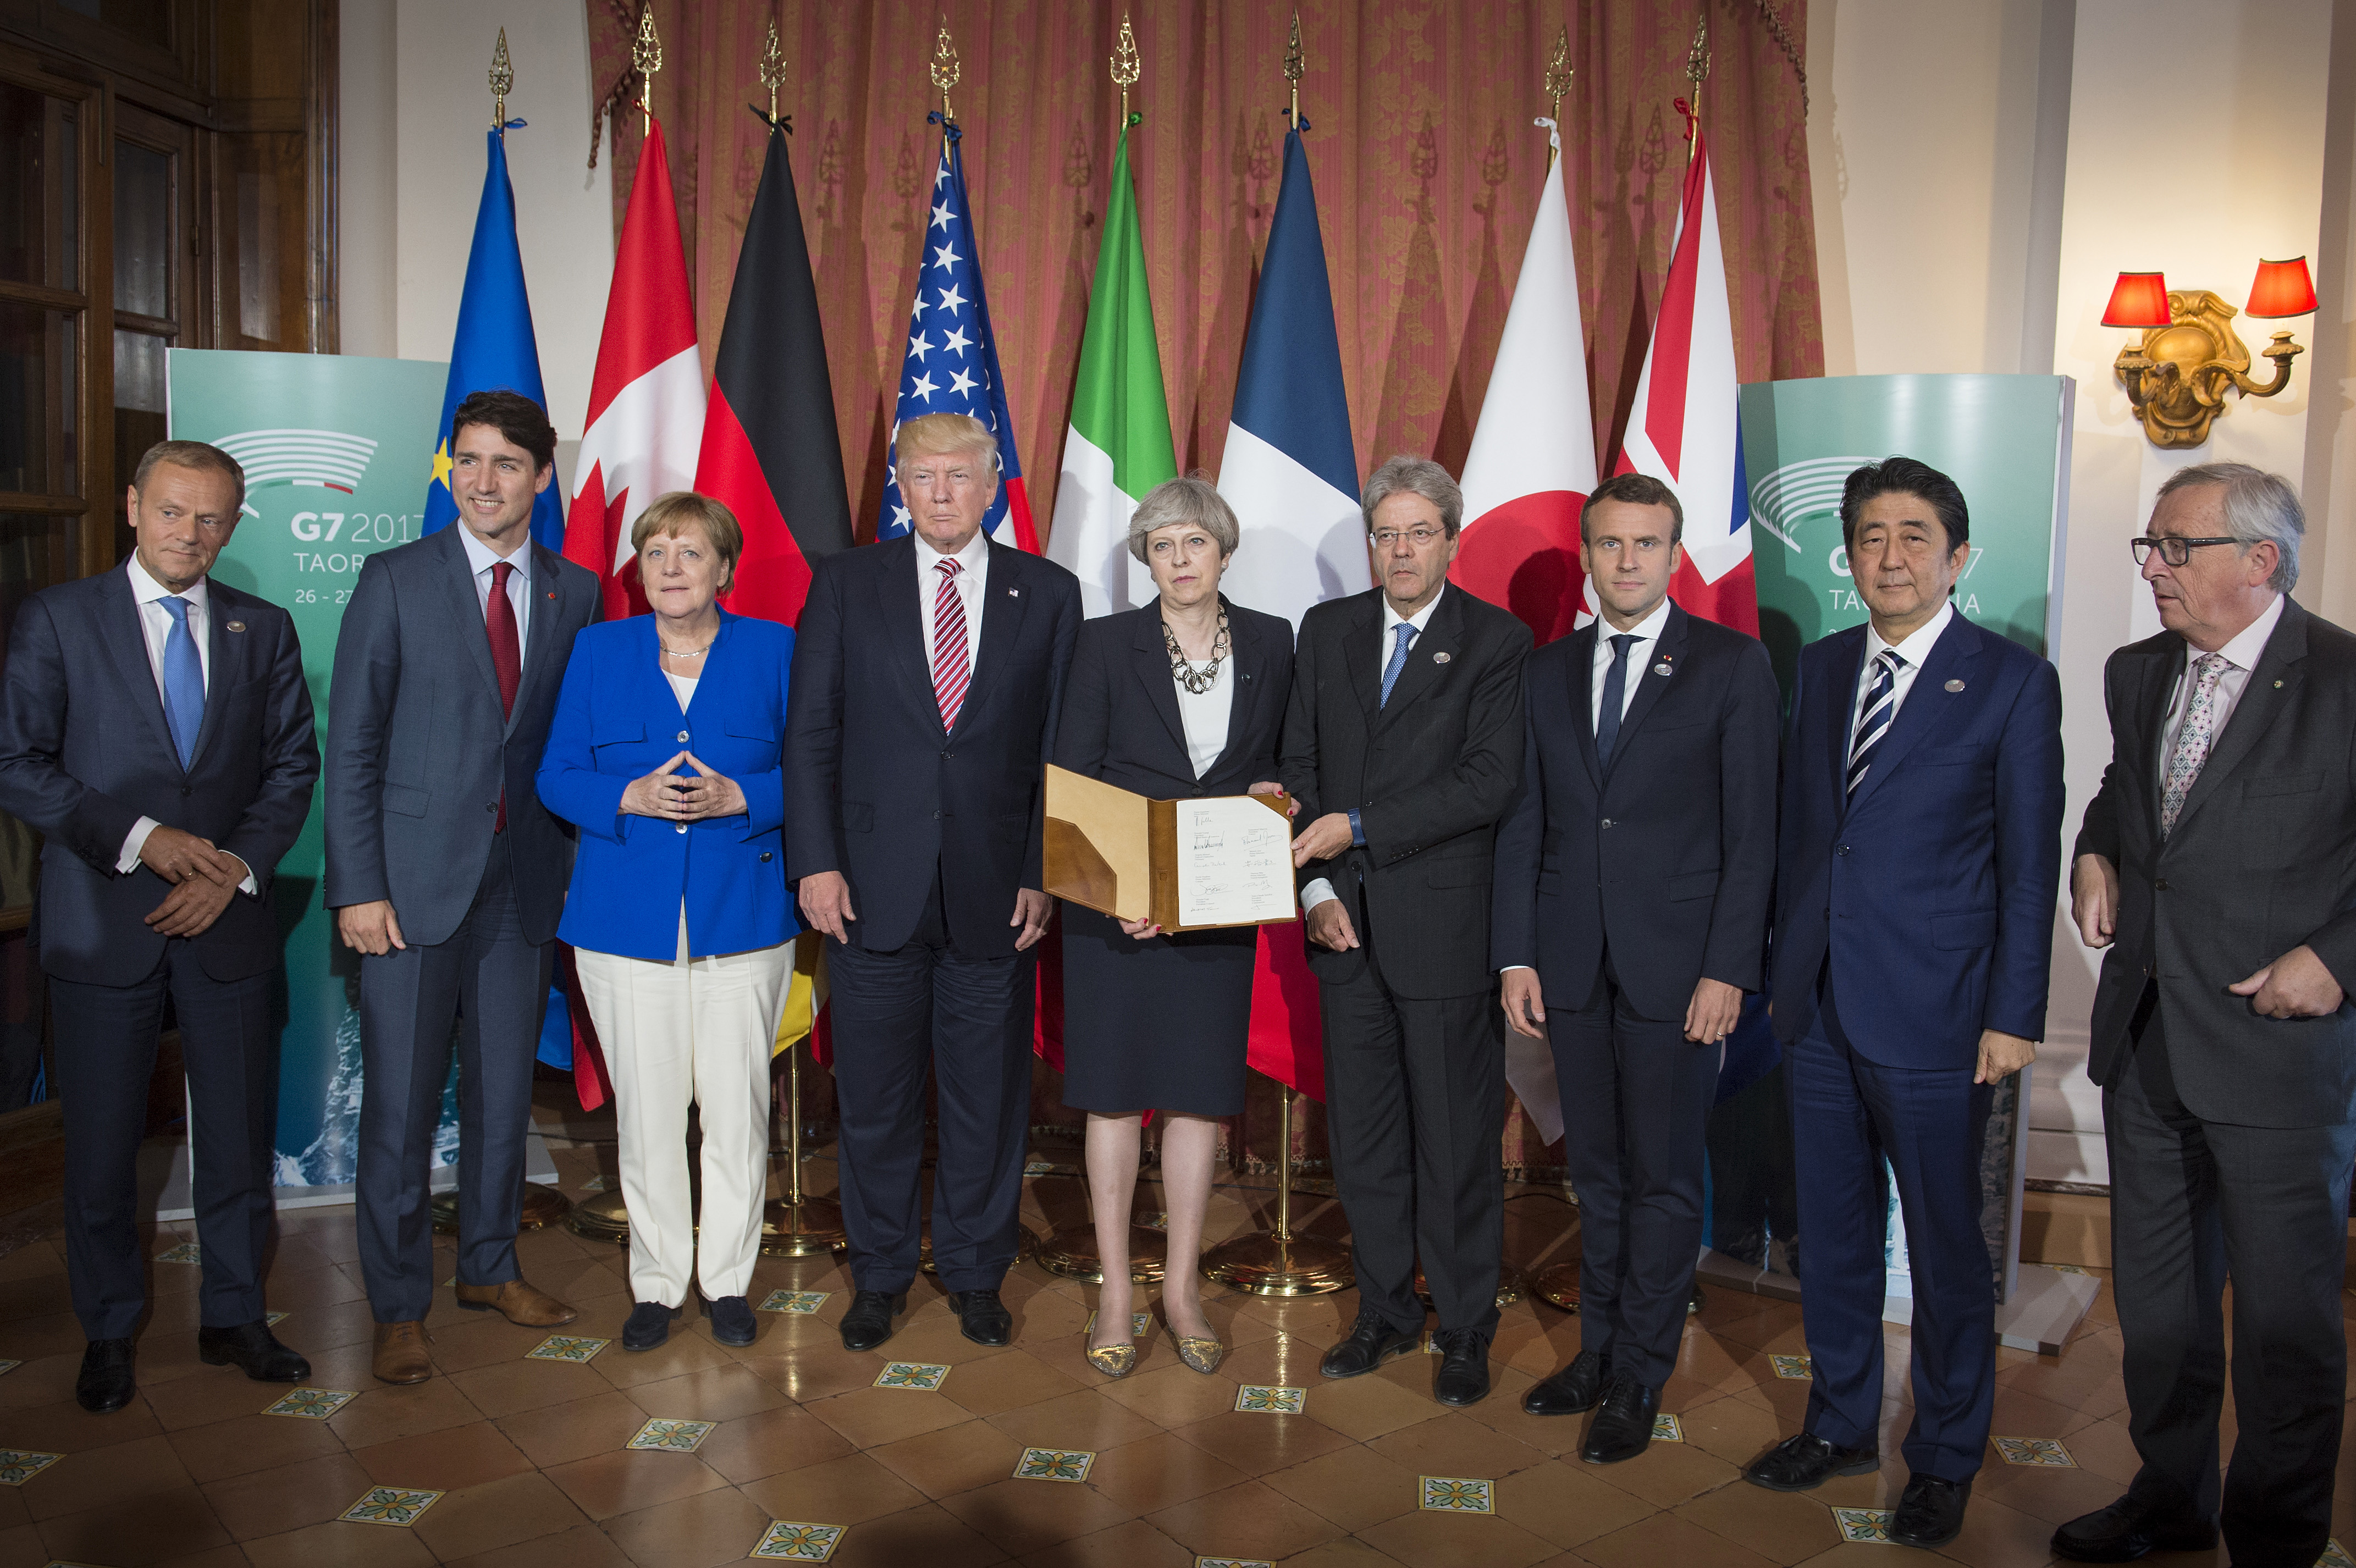 European Council President Donald Tusk, Canadian Prime Minister Justin Trudeau, German Chancellor Angela Merkel, US President Donald Trump, British Prime Minister Theresa May, Italian Prime Minister Paolo Gentiloni, French President Emmanuel Macron, Japanese Prime Minister Shinzo Abe and European Commission President Jean -Claude Juncker during the G7 summit on May 26, 2017 in Taormina, Italy. (Guido Bergmann—Bundesregierung/Getty Images)